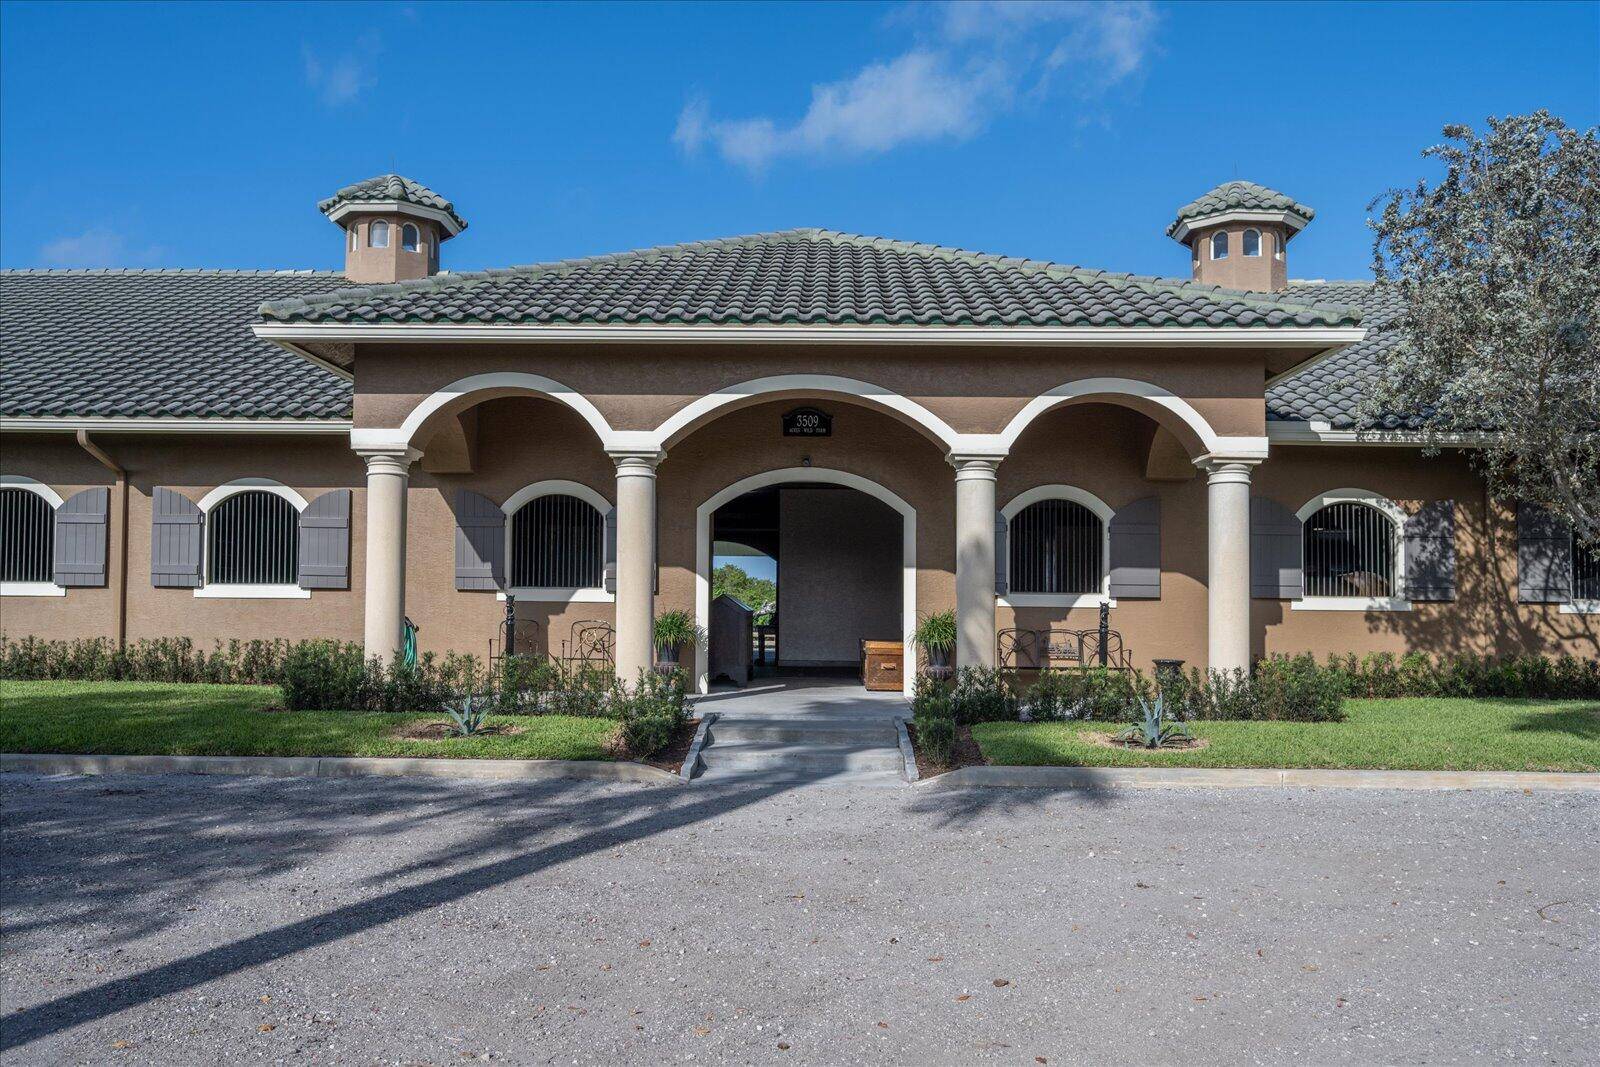 Don't miss out on the opportunity to spend your winter at this amazing equestrian facility, just steps from Wellington International and the Winter Equestrian Festival.